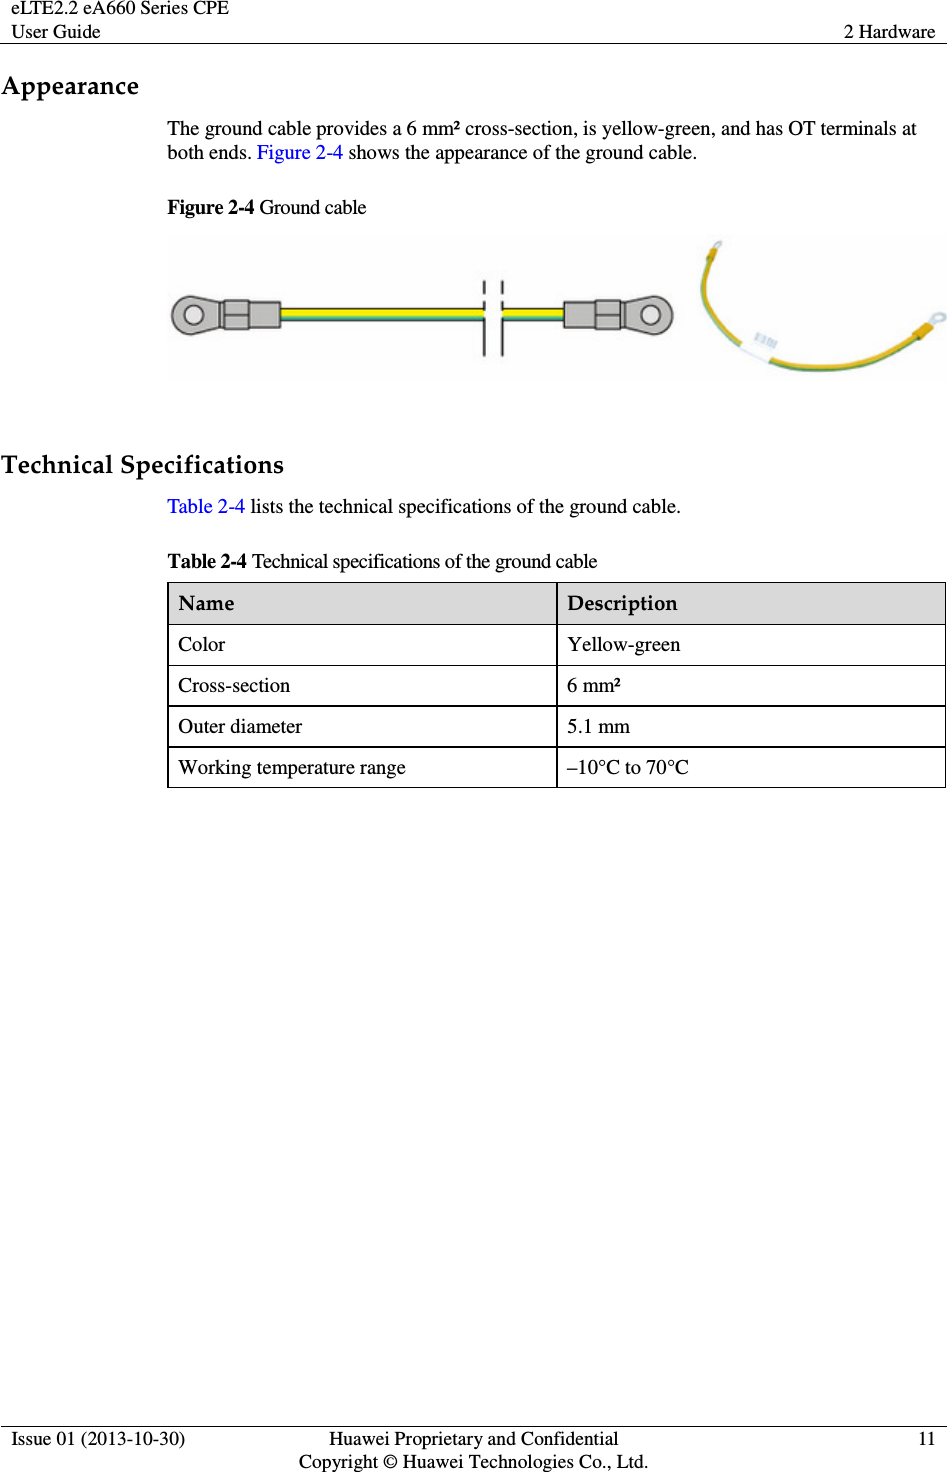 eLTE2.2 eA660 Series CPE User Guide  2 Hardware  Issue 01 (2013-10-30)  Huawei Proprietary and Confidential                                     Copyright © Huawei Technologies Co., Ltd. 11  Appearance The ground cable provides a 6 mm² cross-section, is yellow-green, and has OT terminals at both ends. Figure 2-4 shows the appearance of the ground cable. Figure 2-4 Ground cable   Technical Specifications Table 2-4 lists the technical specifications of the ground cable. Table 2-4 Technical specifications of the ground cable Name  Description Color  Yellow-green Cross-section  6 mm² Outer diameter  5.1 mm Working temperature range  –10°C to 70°C 